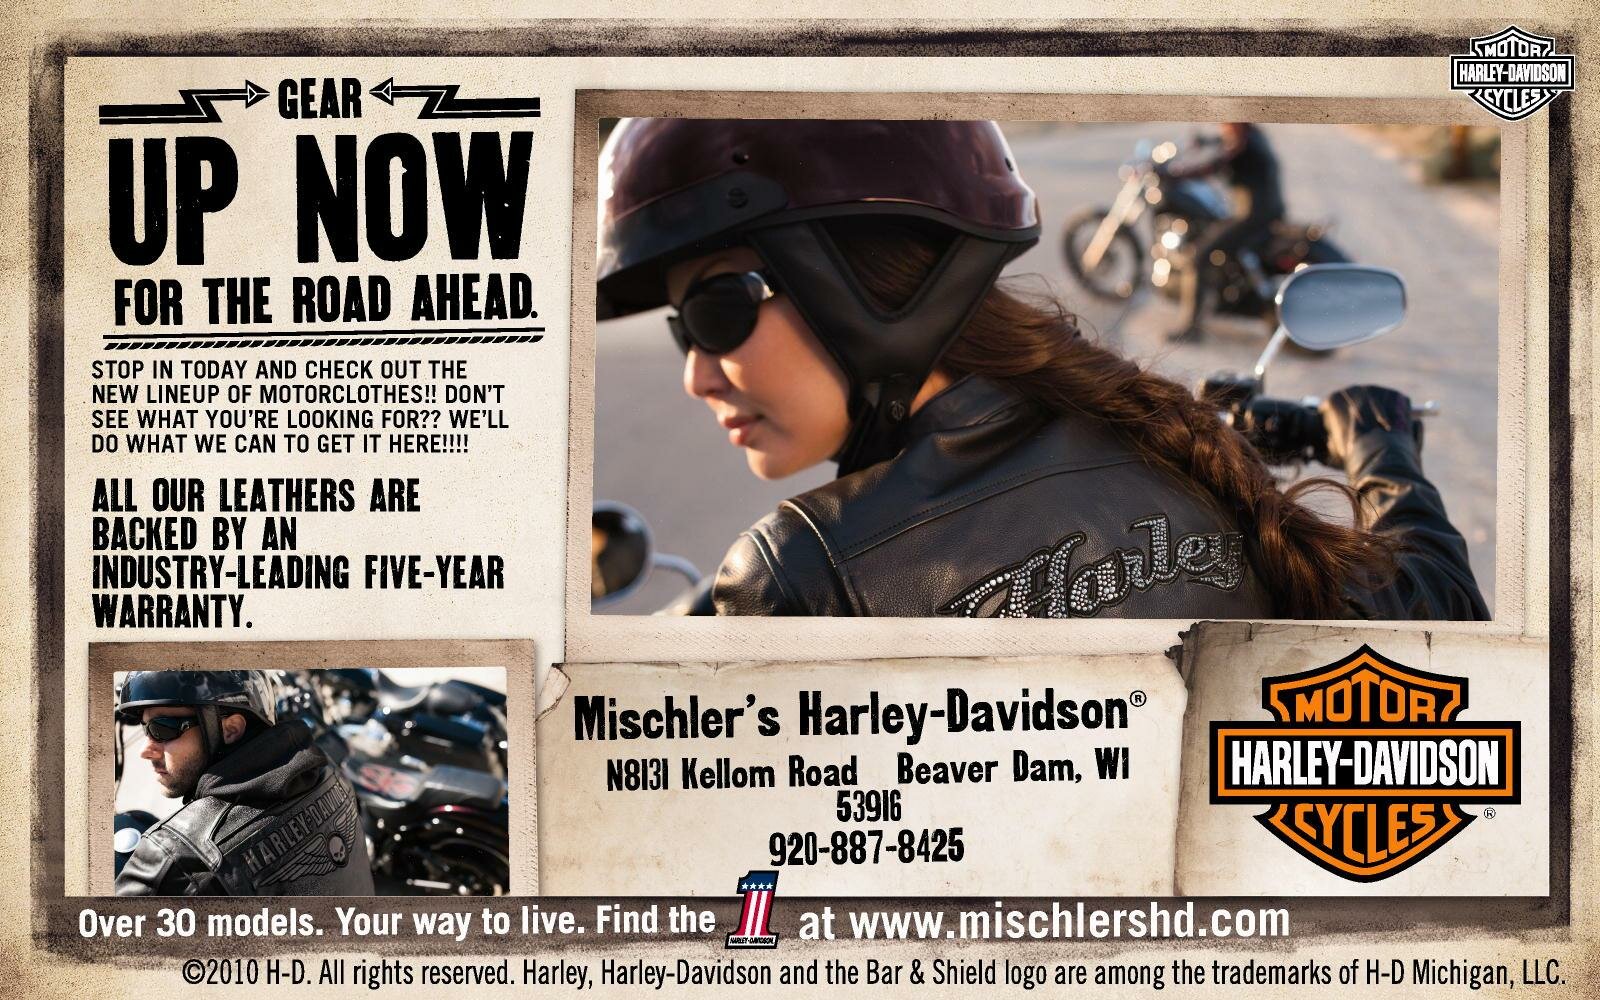 Mischler's Harley-Davidson of Beaver Dam, Wisconsin has a full service department to service your BMW or Harley motorcycle